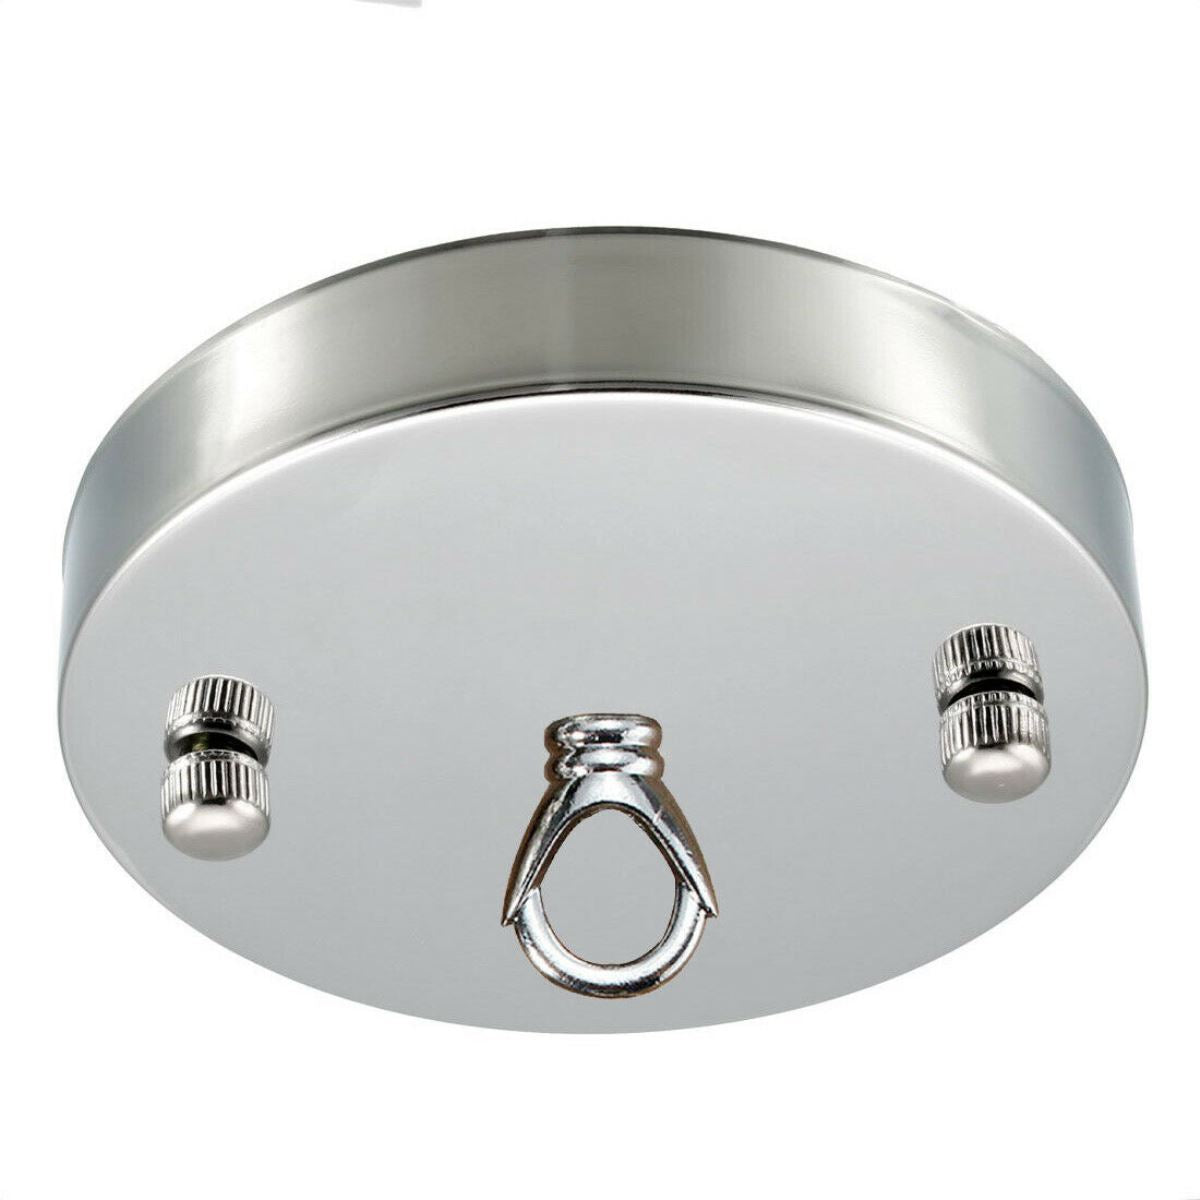 Chrome Color Ceiling Hook Ring Single Point Drop Outlet Plate Perfect for fabric flex cable~2664 - LEDSone UK Ltd